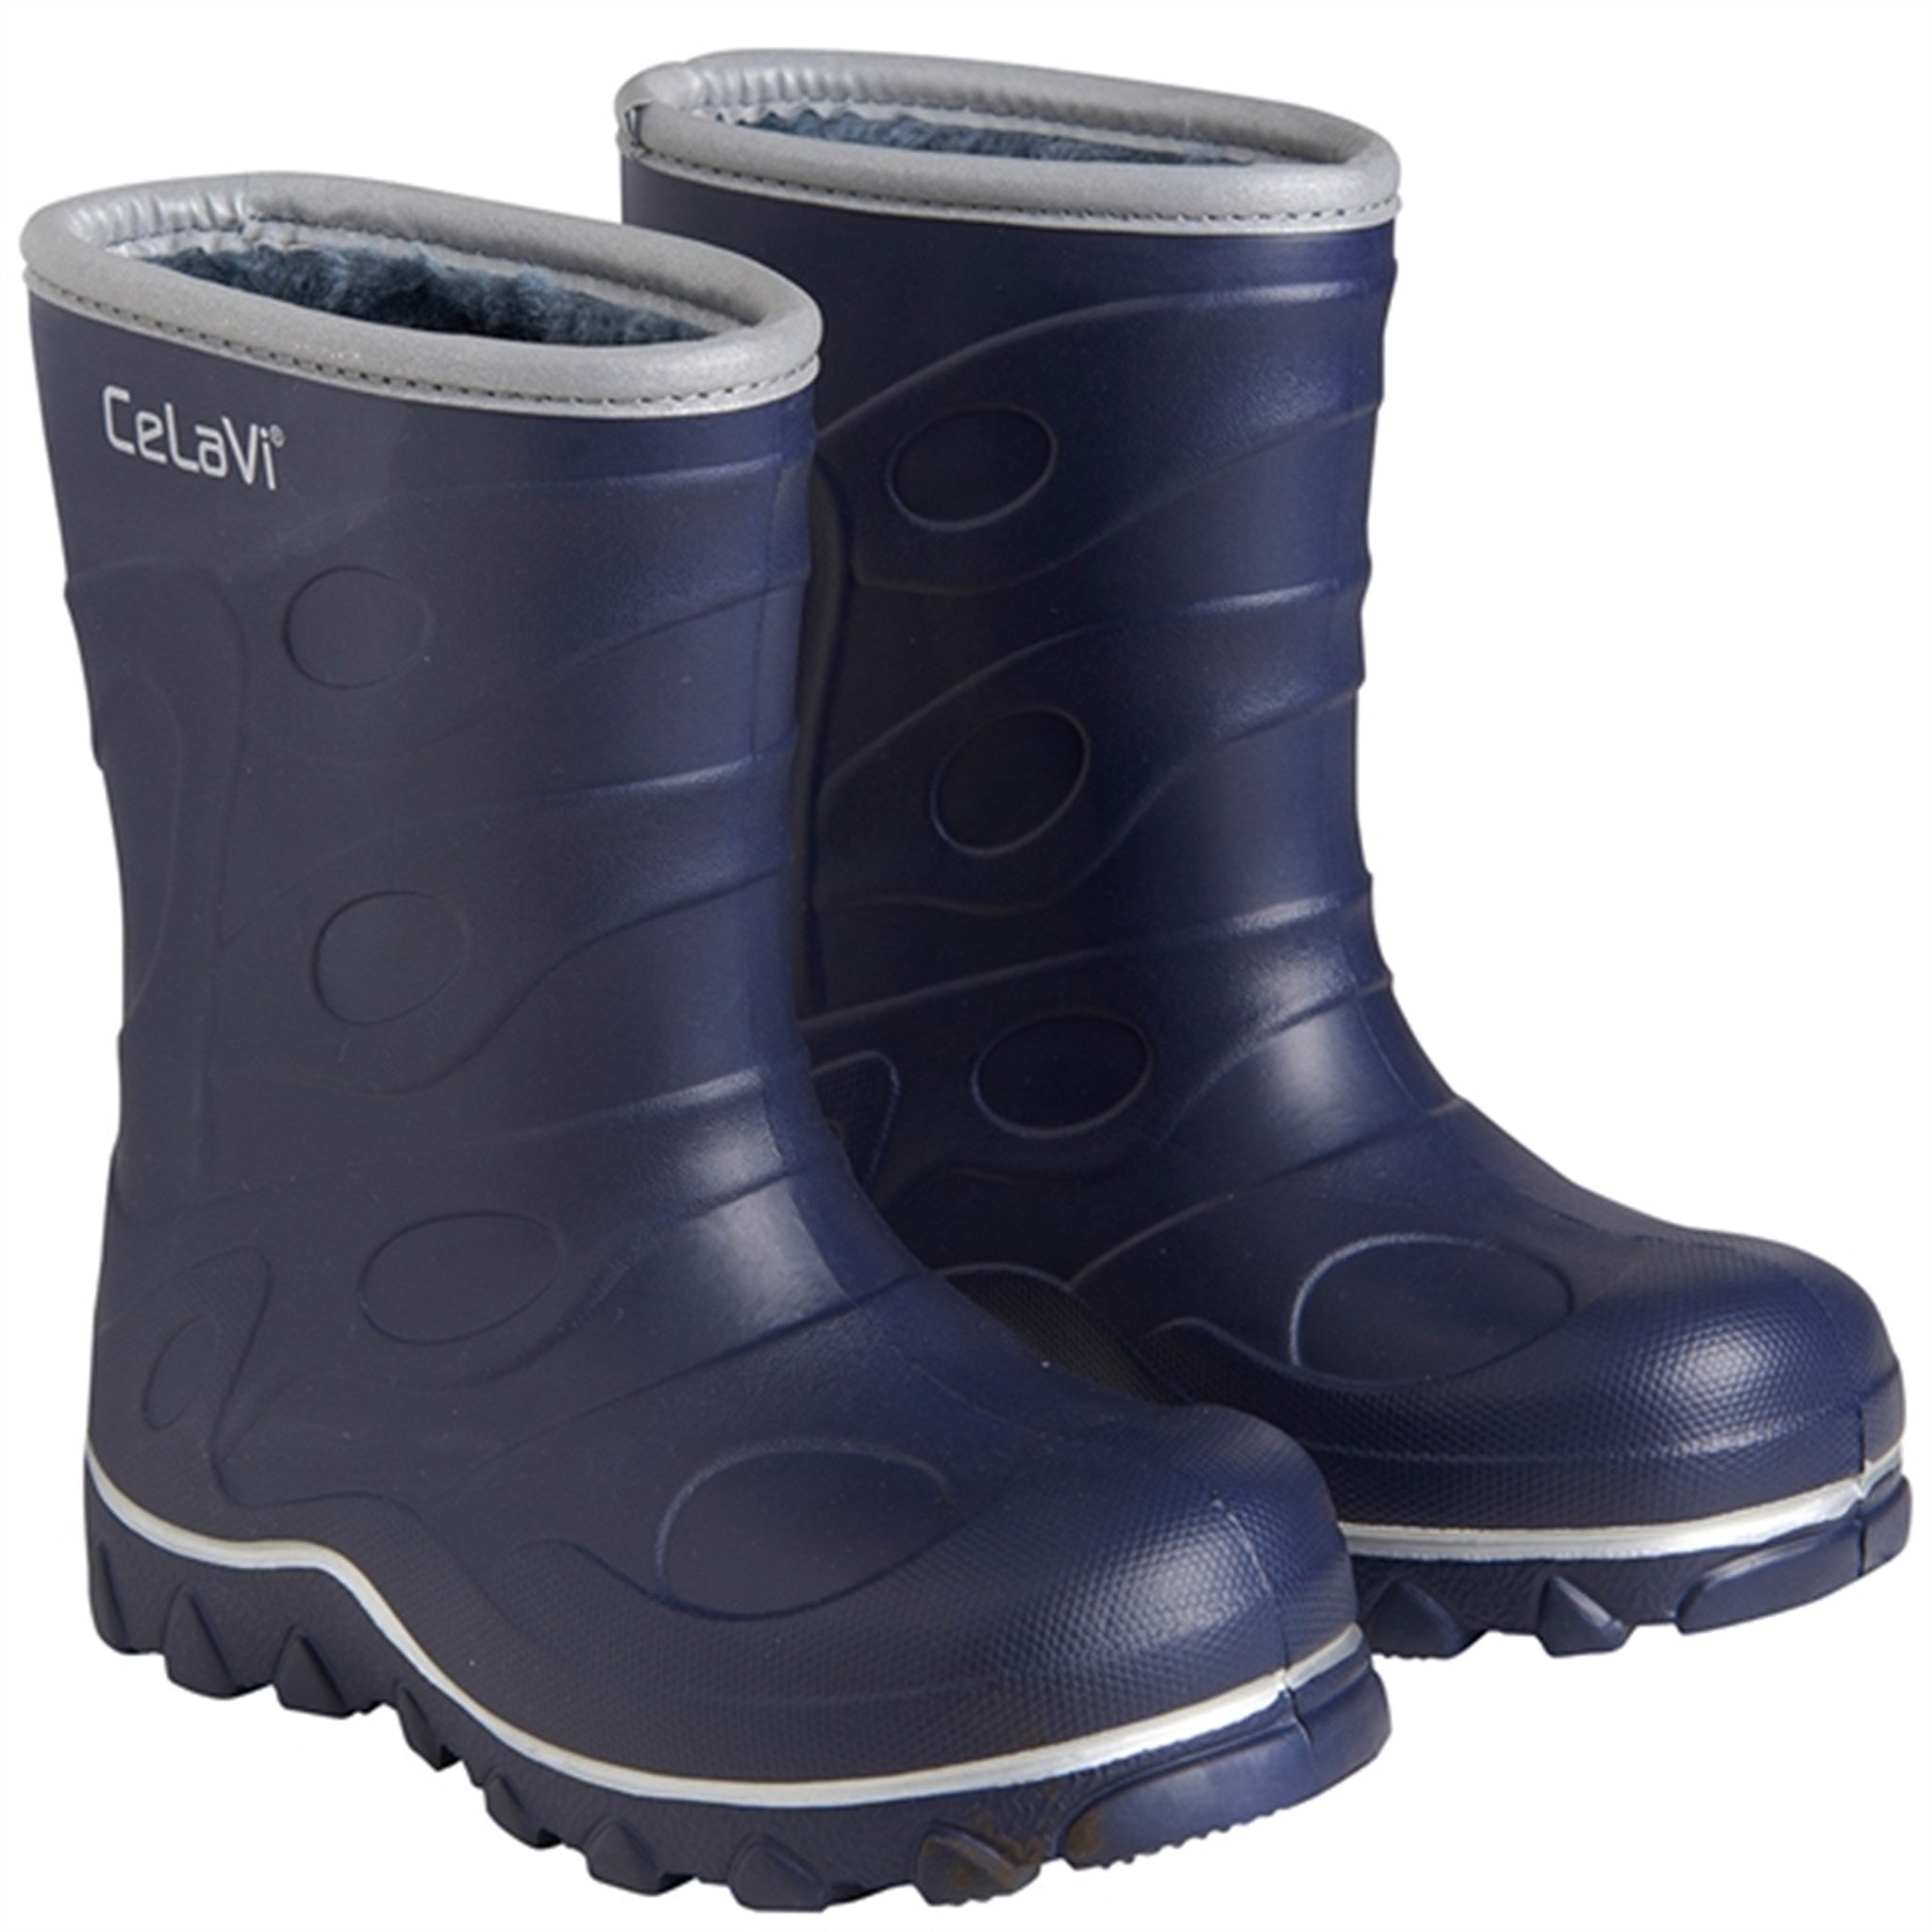 Celavi Thermo Boots Navy